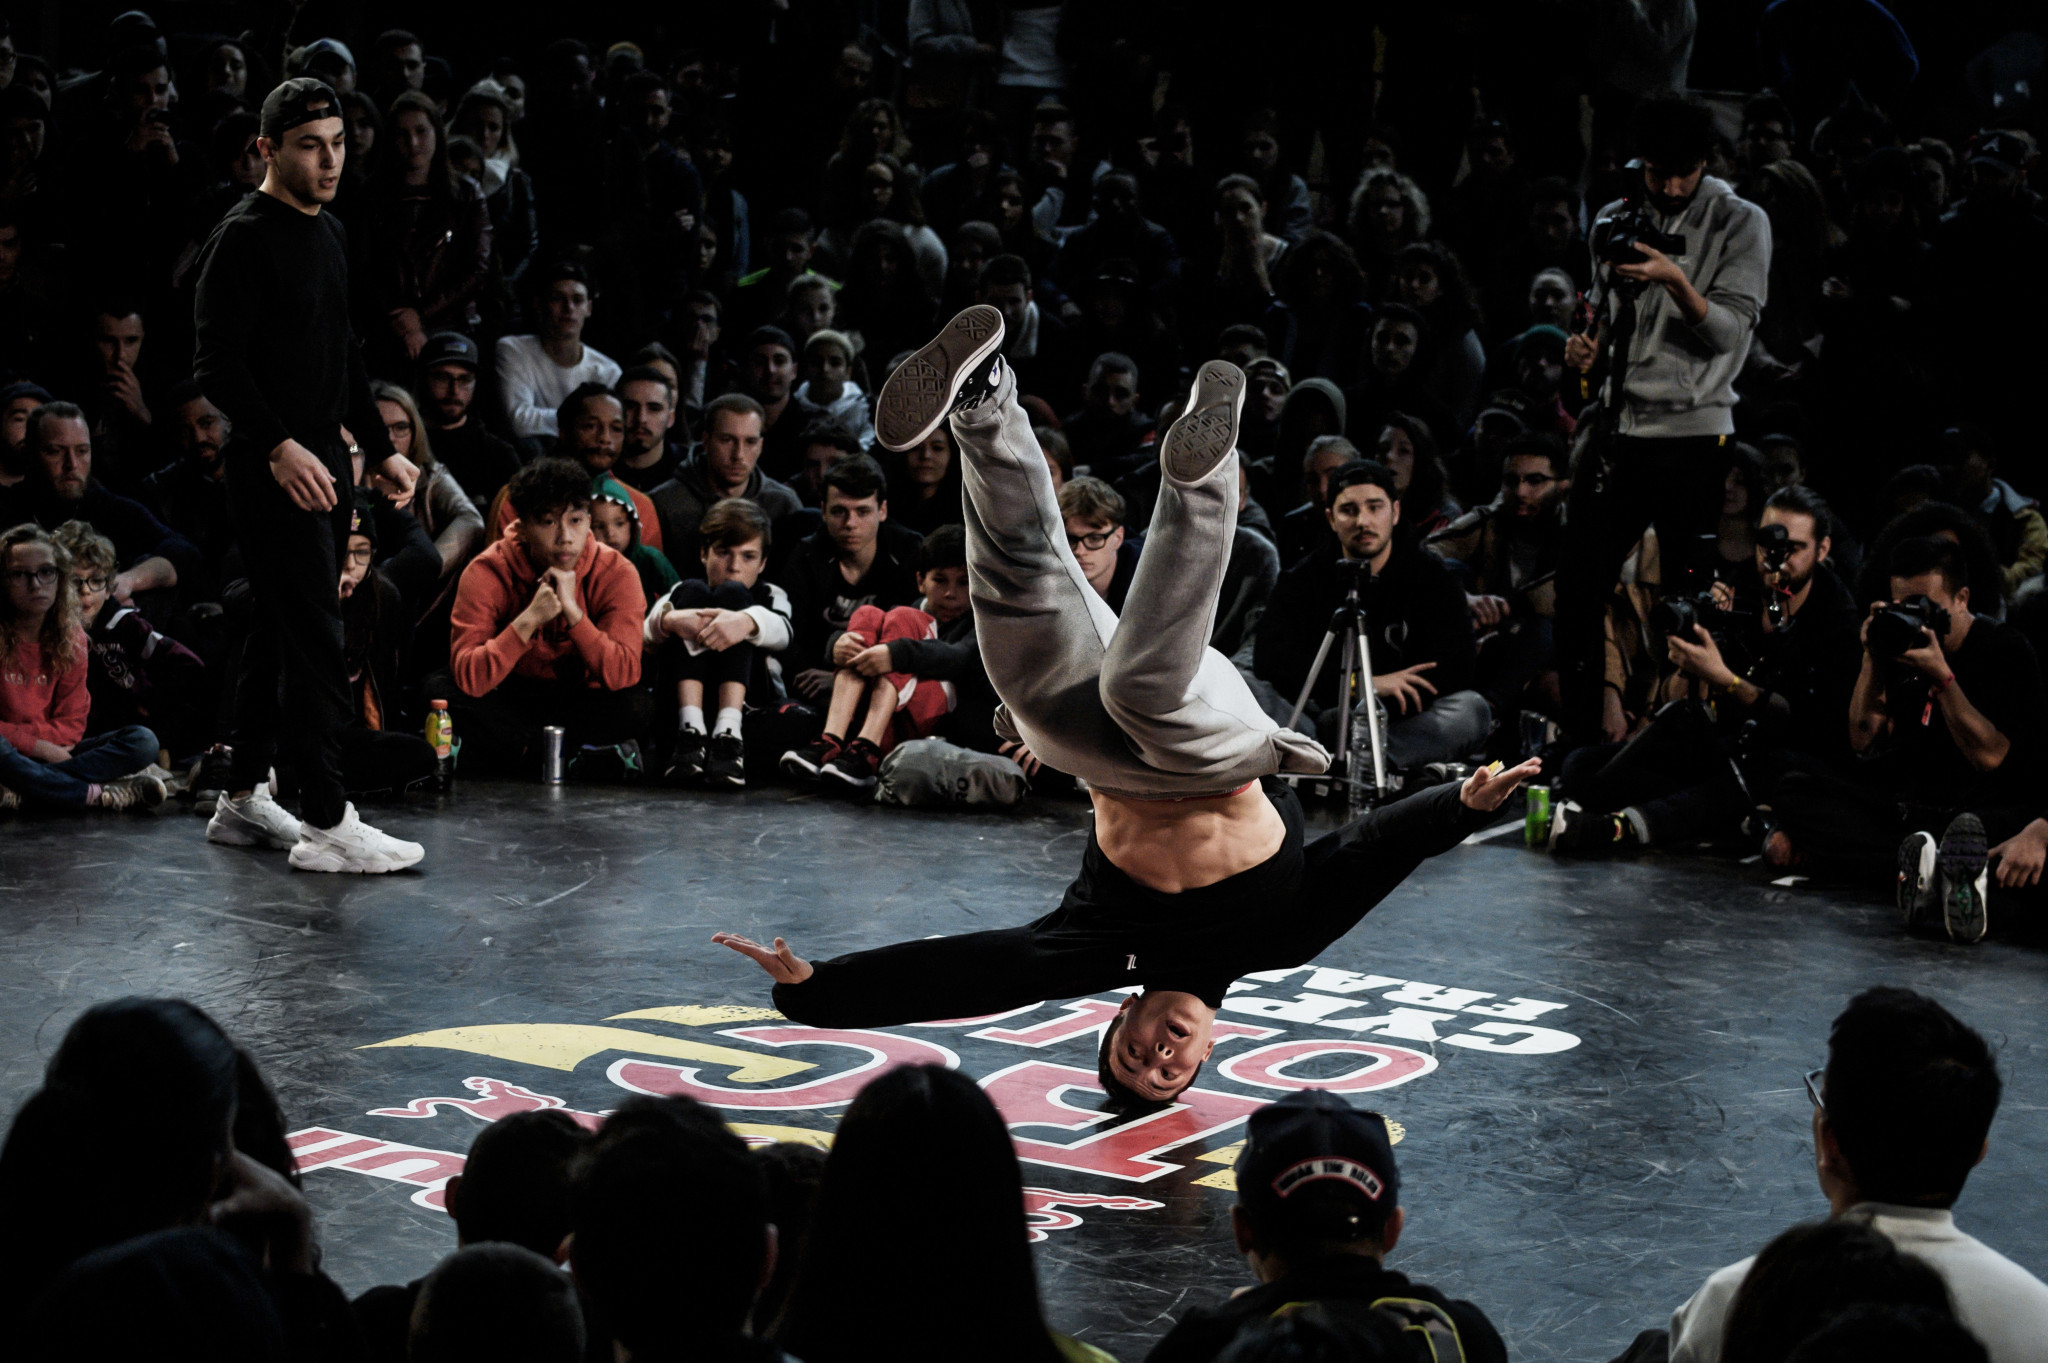 Breakdancing under the spotlight as crowds gather for FISE Montpellier